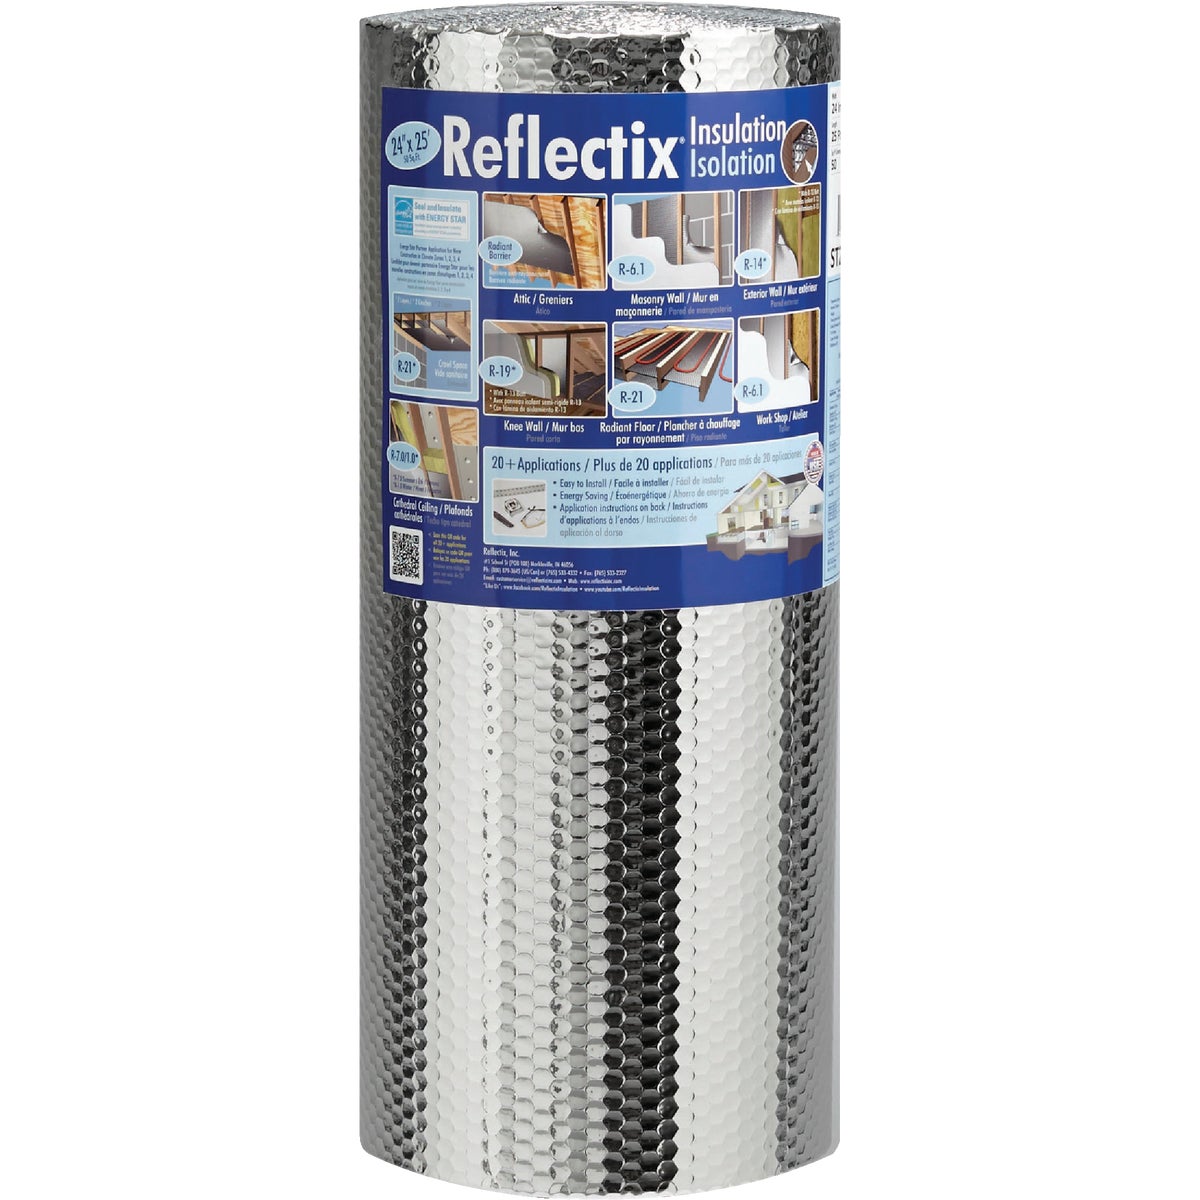 Reflectix 24 In. x 25 Ft. Staple Tab Reflective Insulation